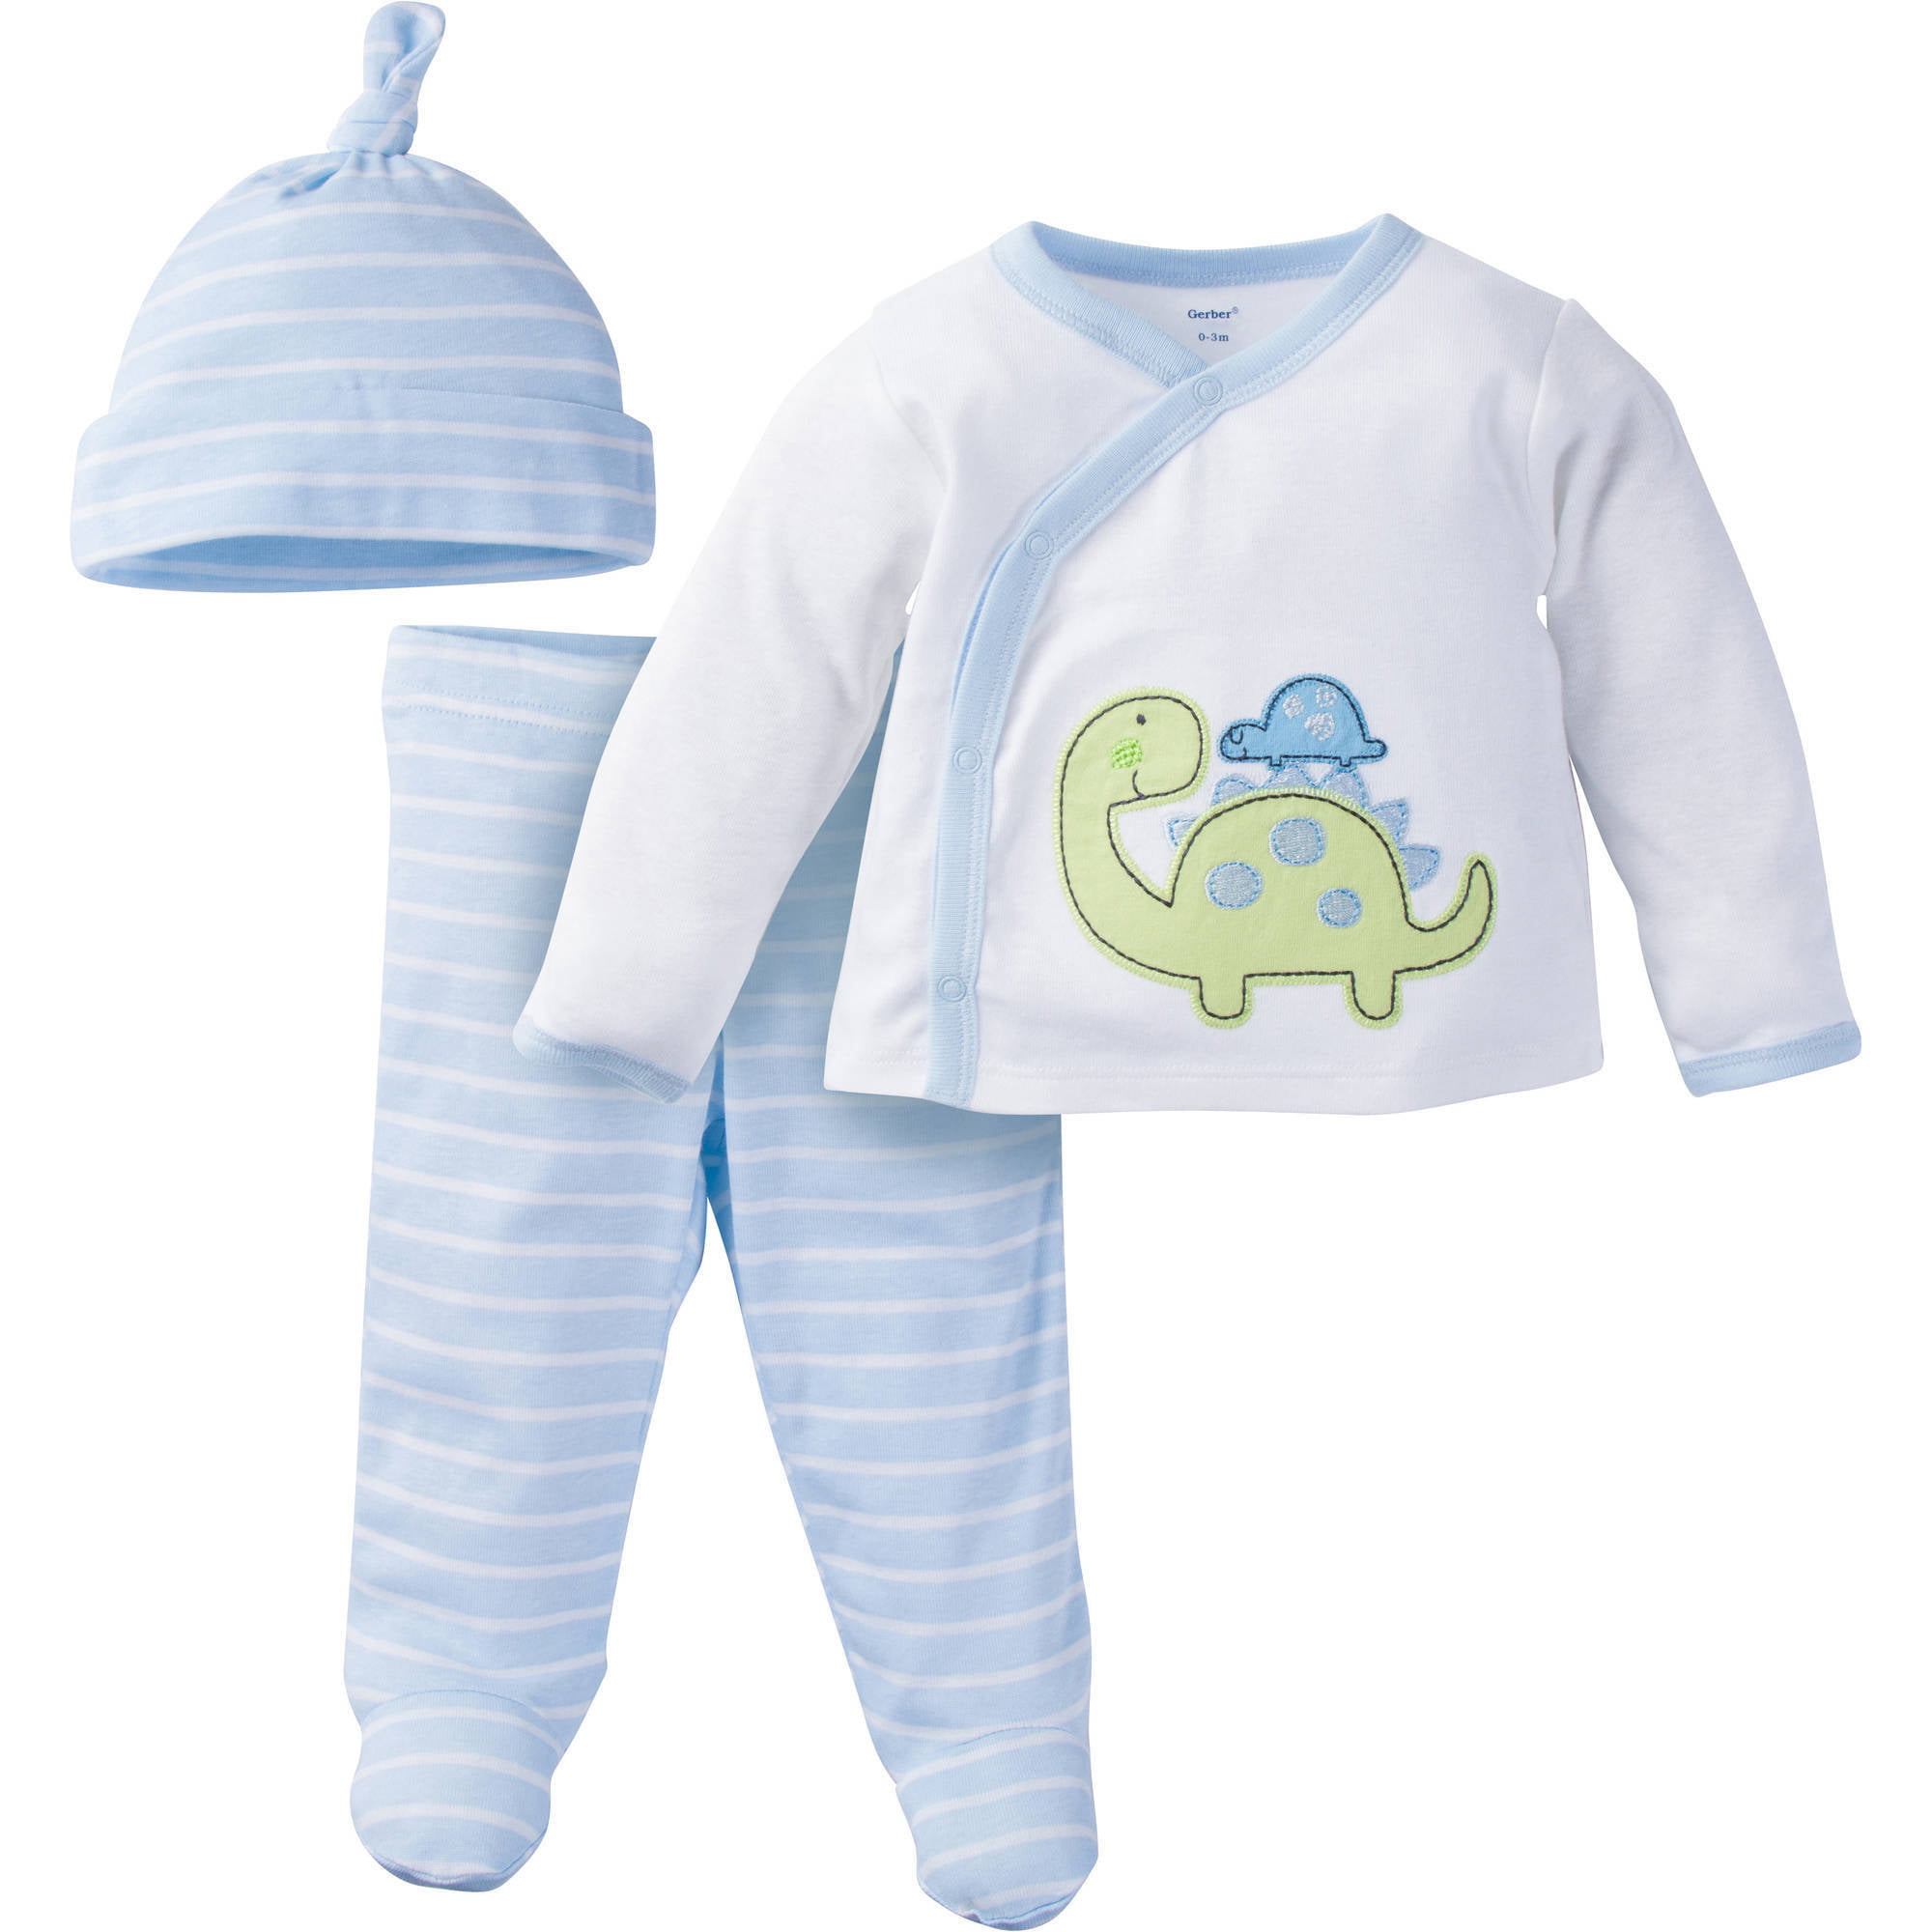 newborn bringing home baby outfit